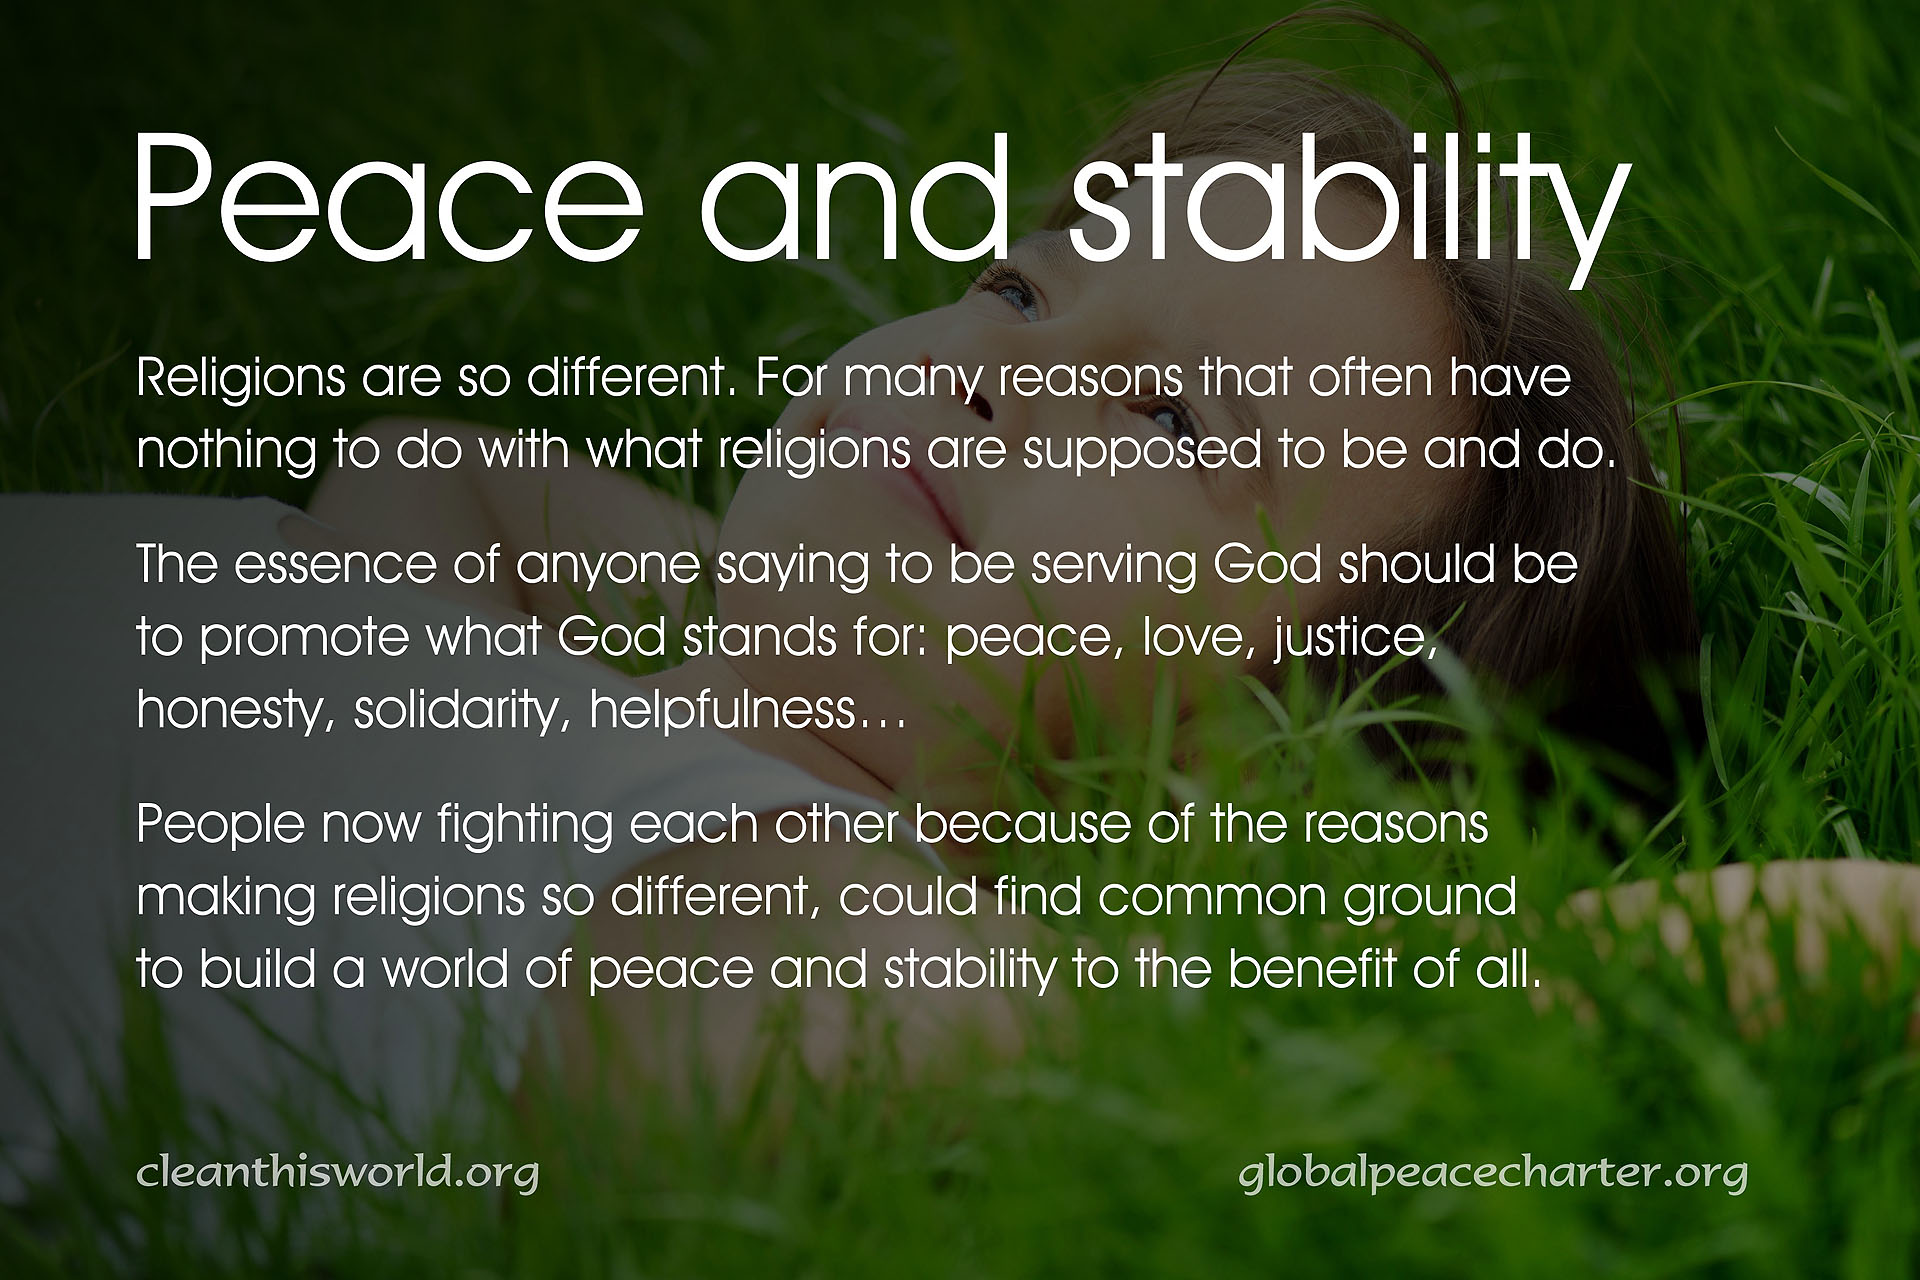 Peace and stability